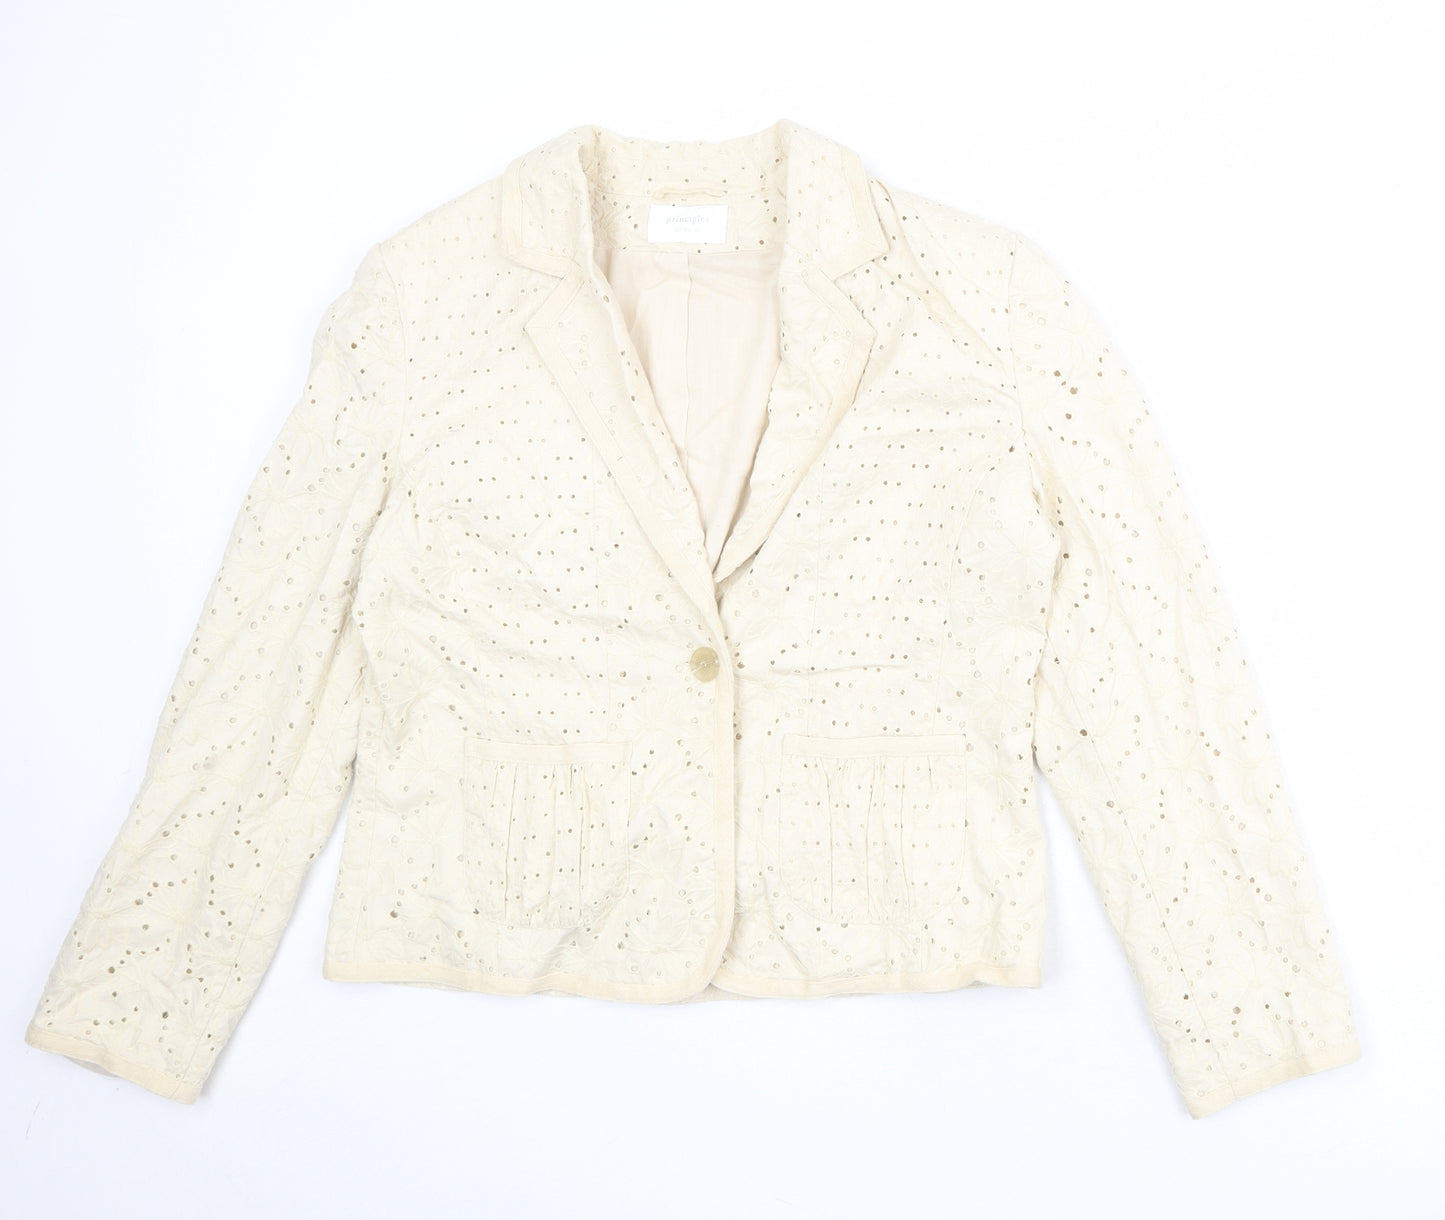 Principles Womens Beige Jacket Blazer Size 16 Button - Broderie Anglaise